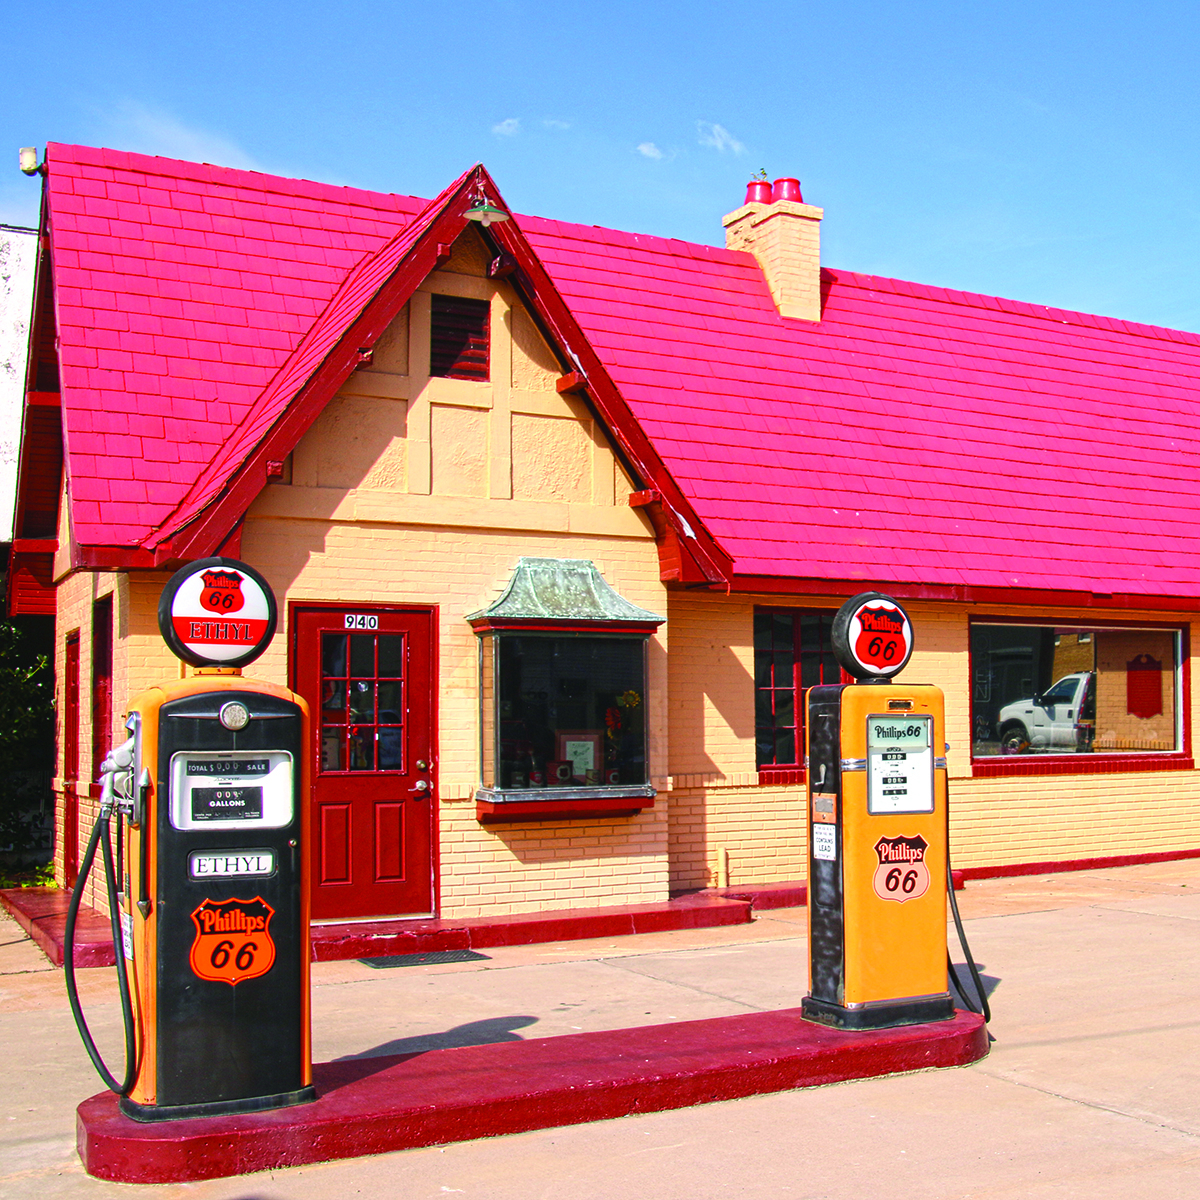 Route 66 Visitor Center